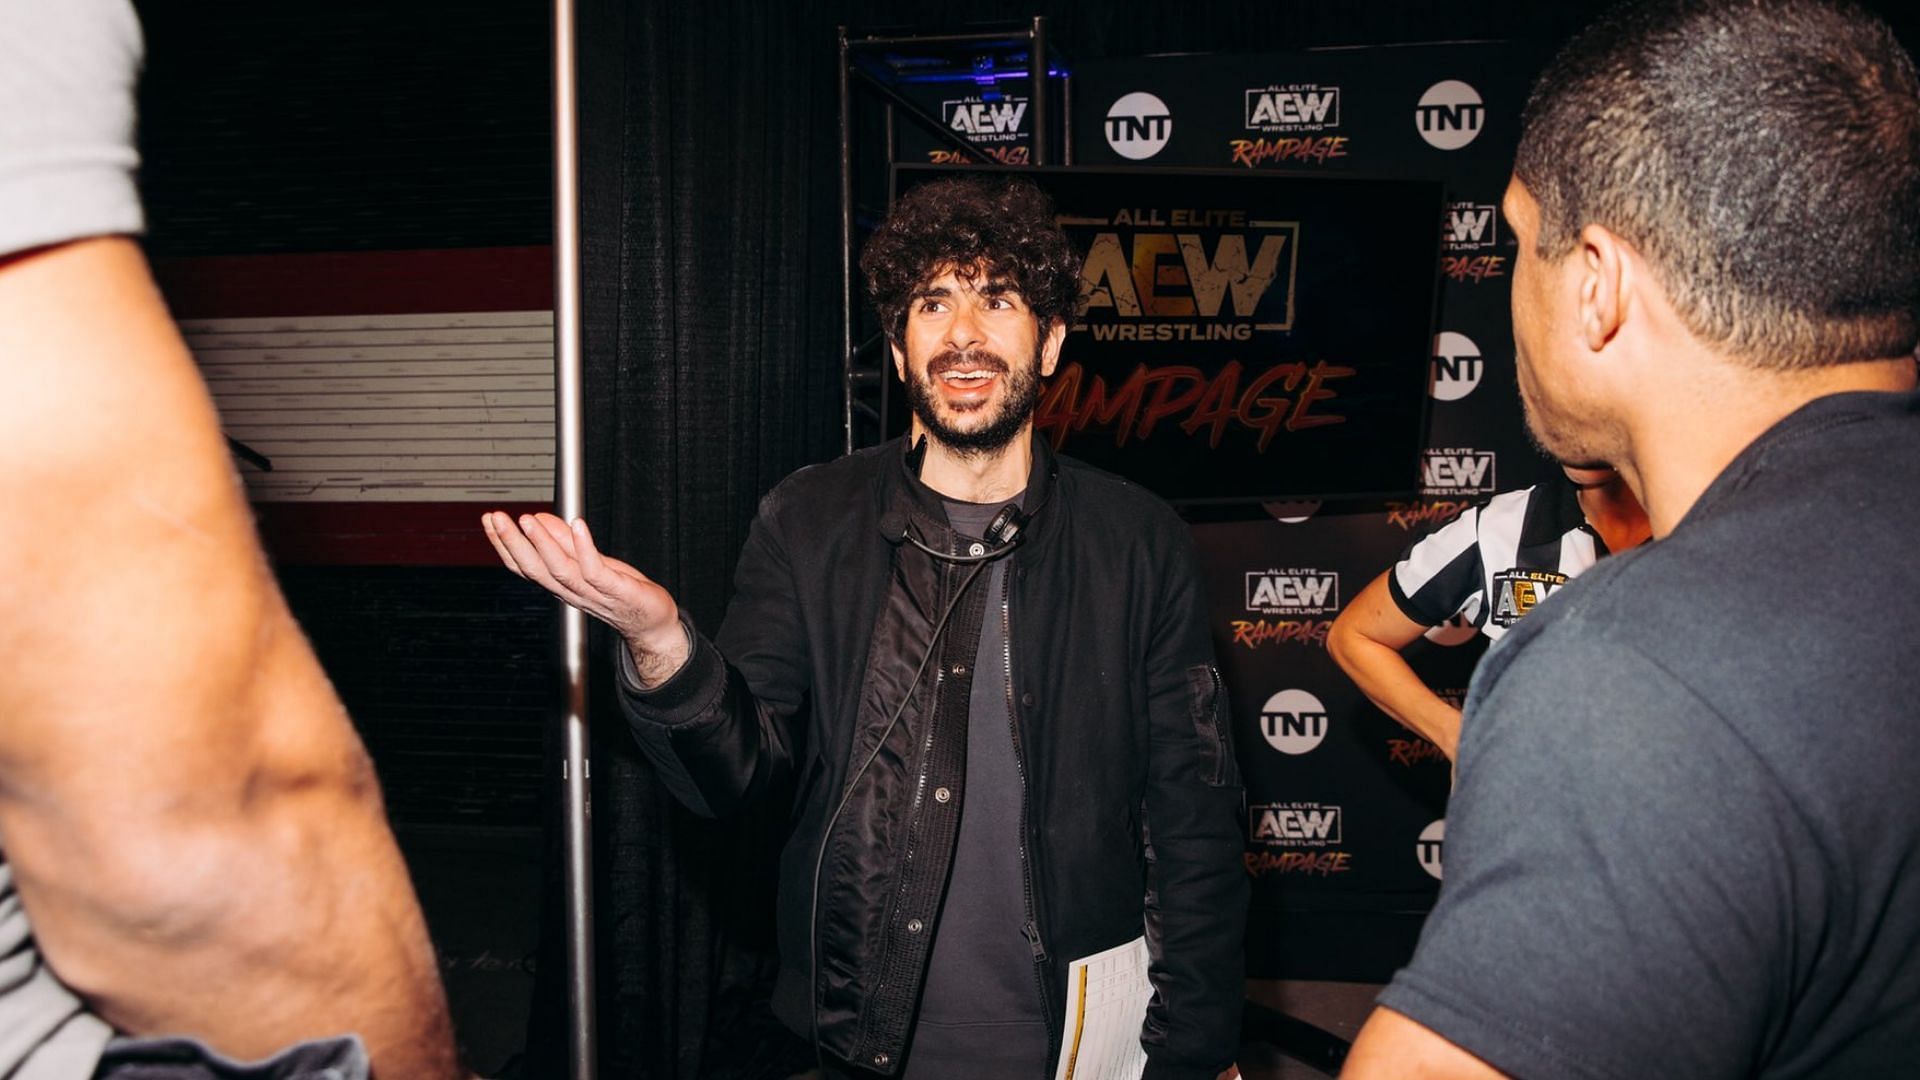 Tony Khan backstage at an AEW event